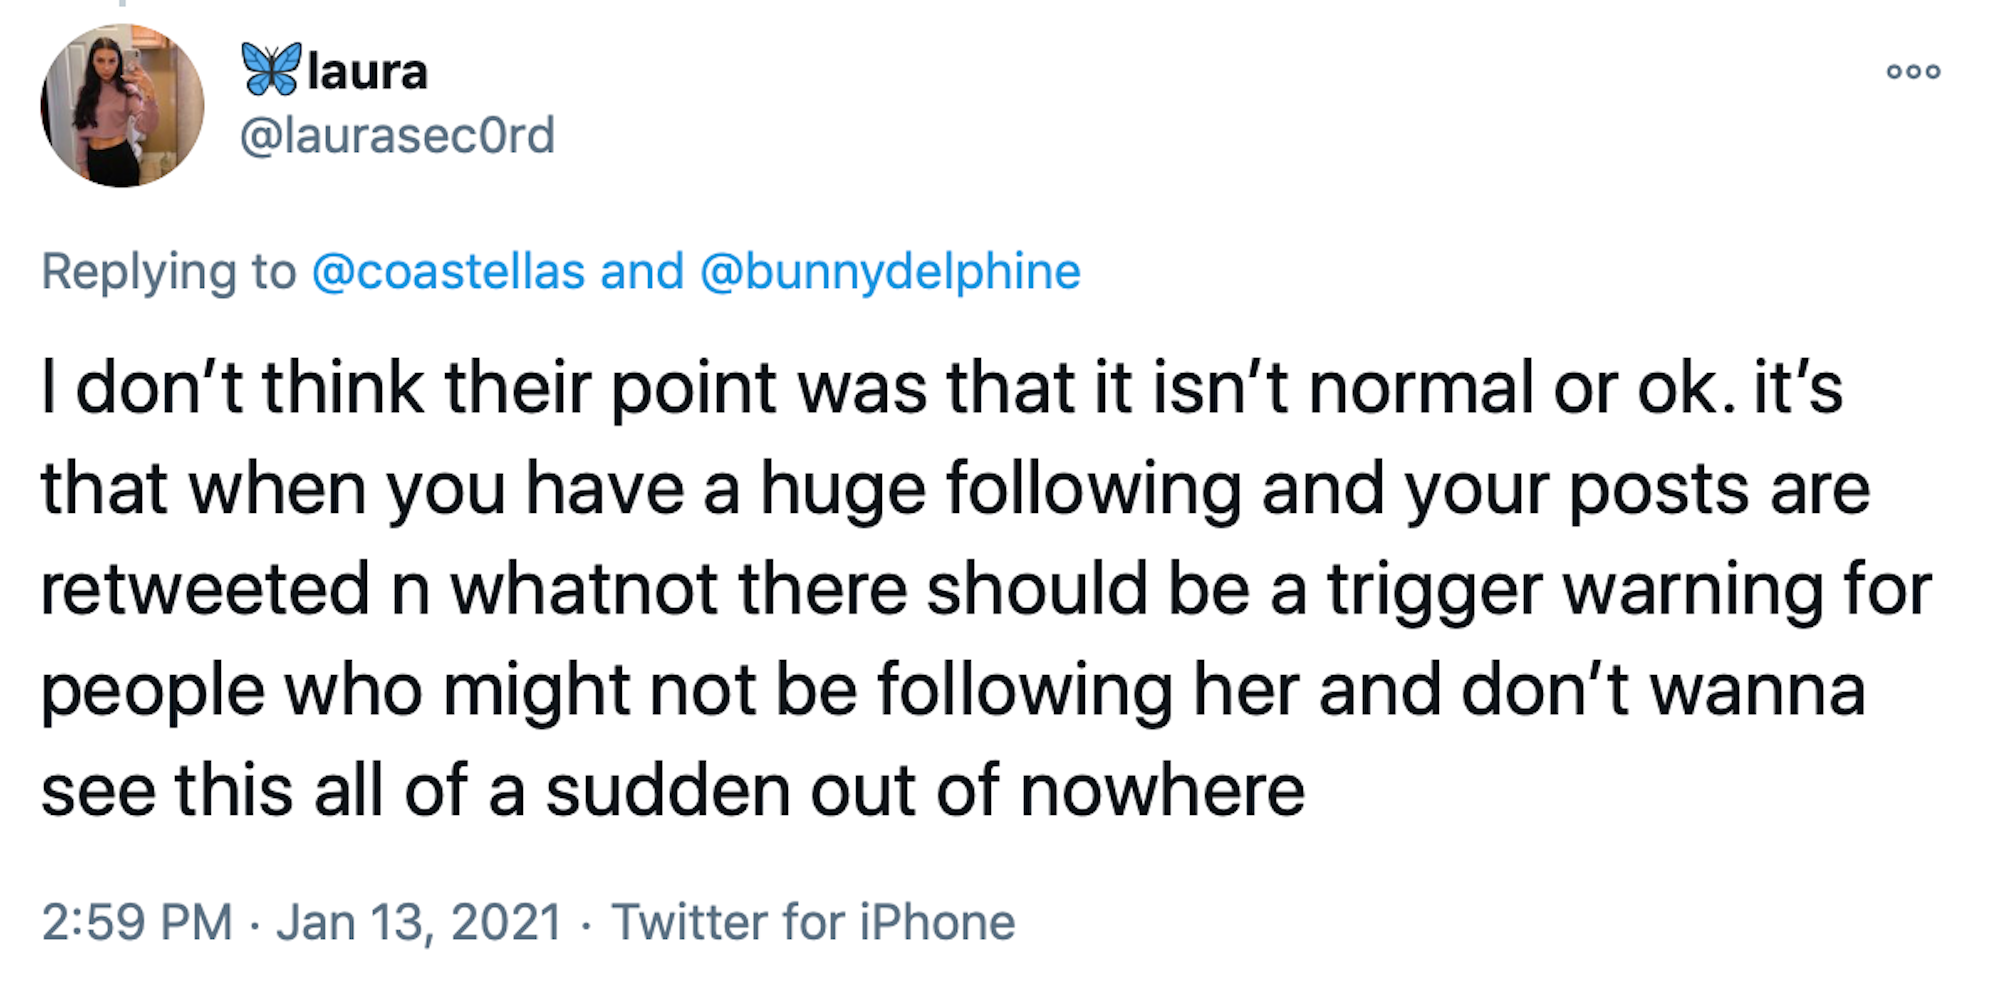 I don’t think their point was that it isn’t normal or ok. it’s that when you have a huge following and your posts are retweeted n whatnot there should be a trigger warning for people who might not be following her and don’t wanna see this all of a sudden out of nowhere